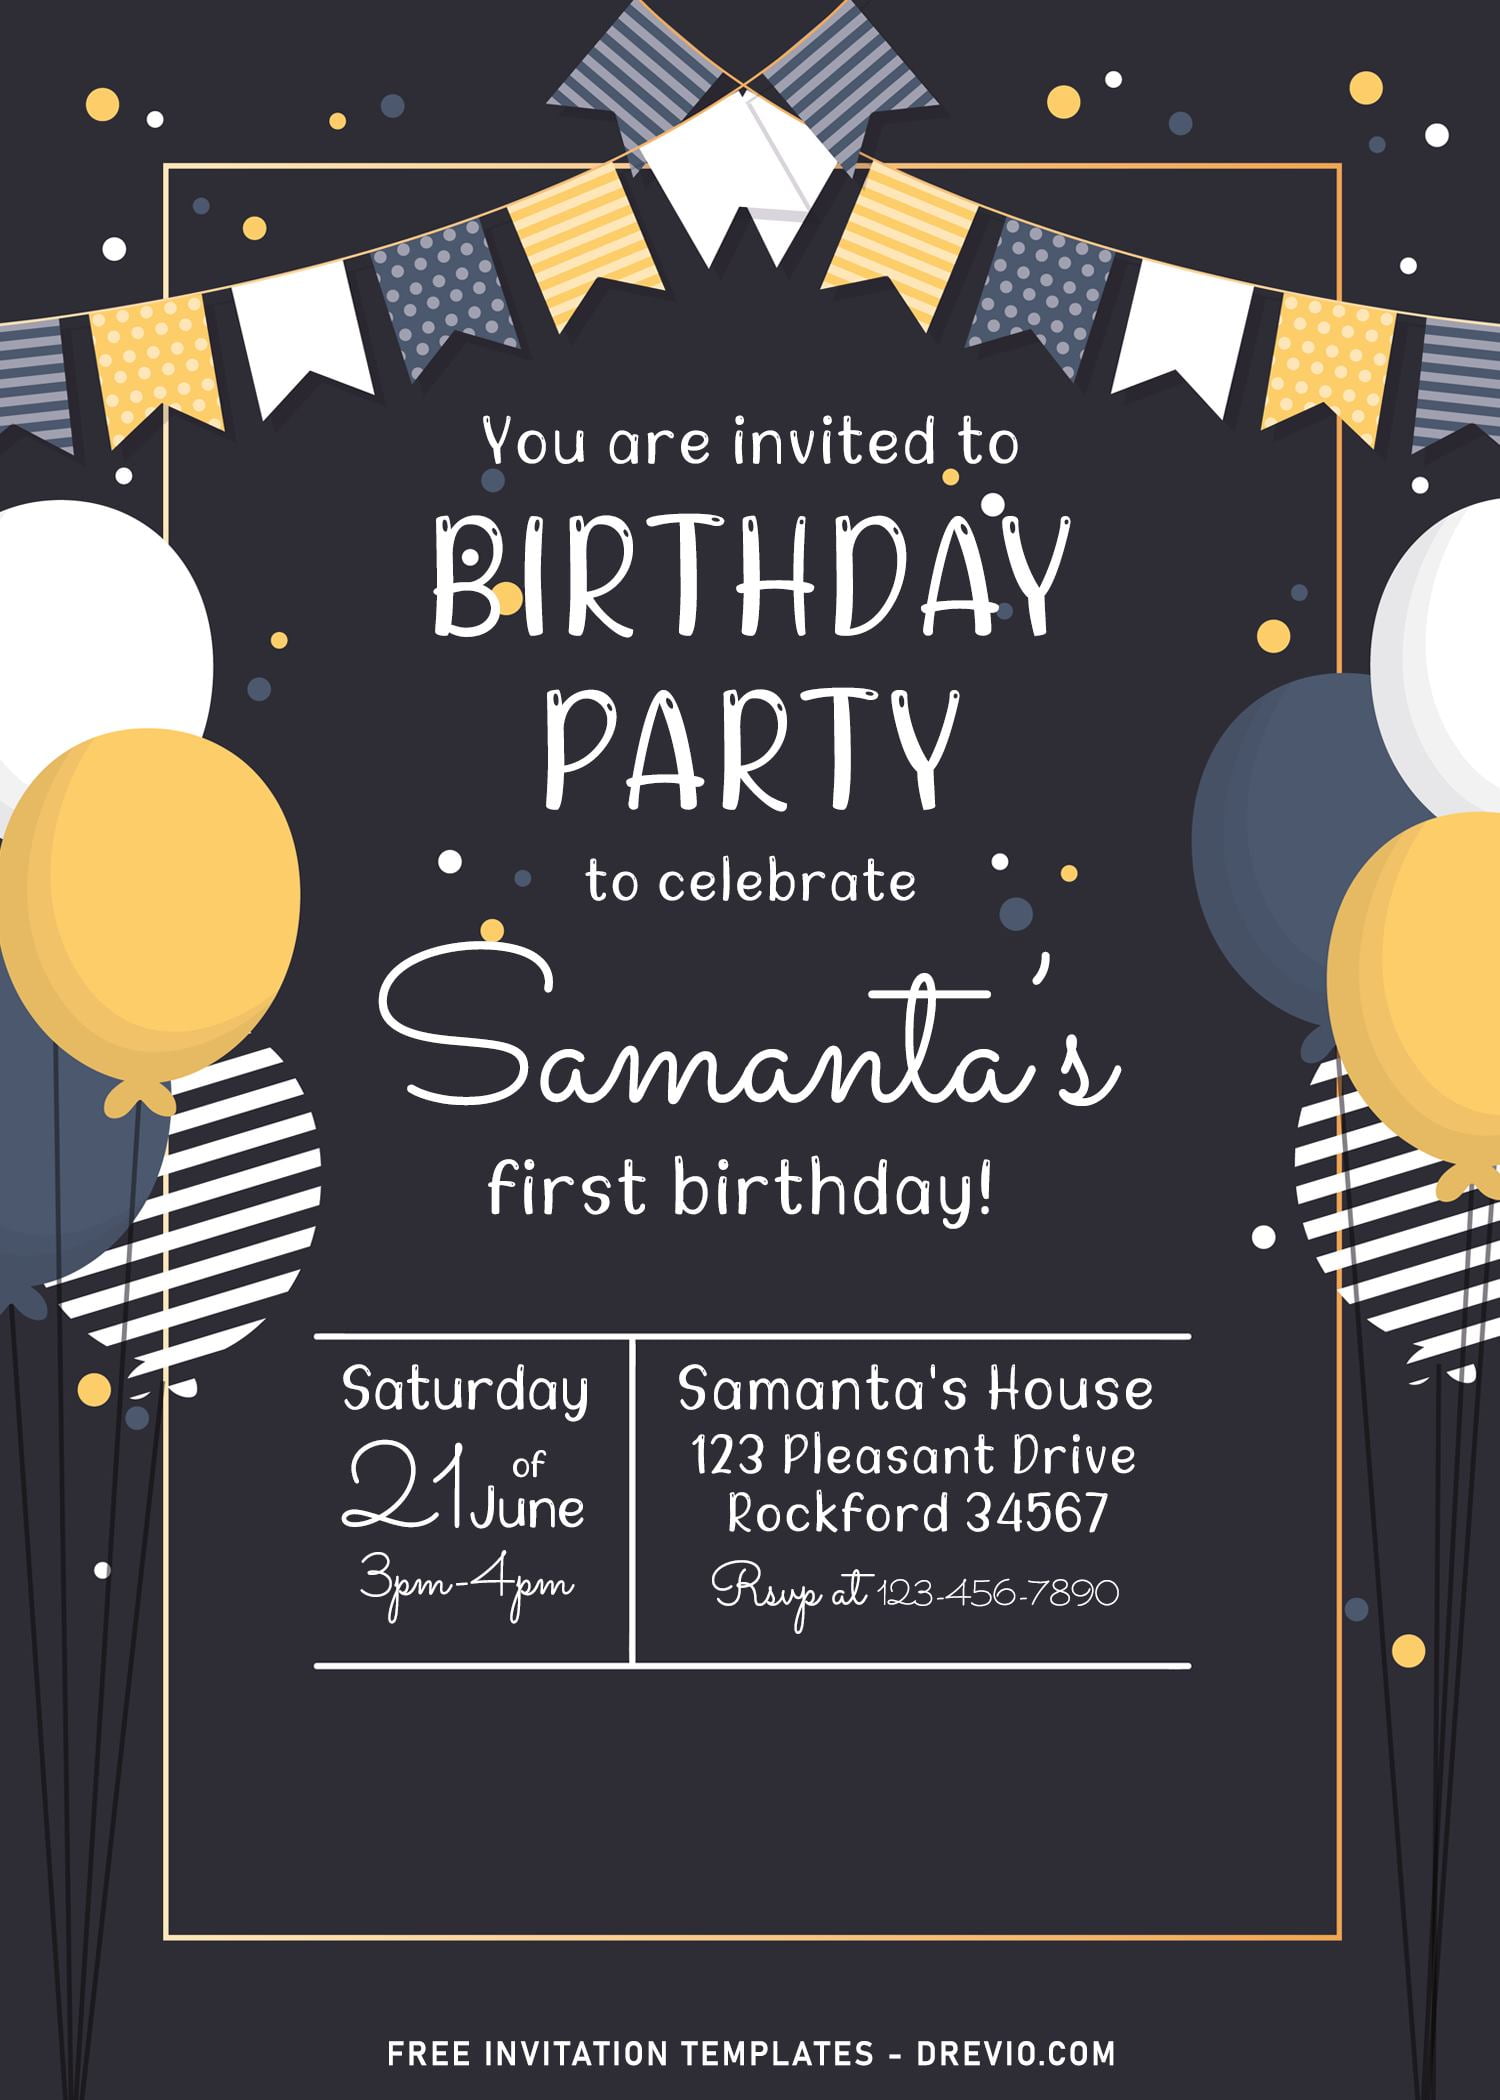 7+ Cute And Fun Birthday Invitation Templates For Any Ages Download